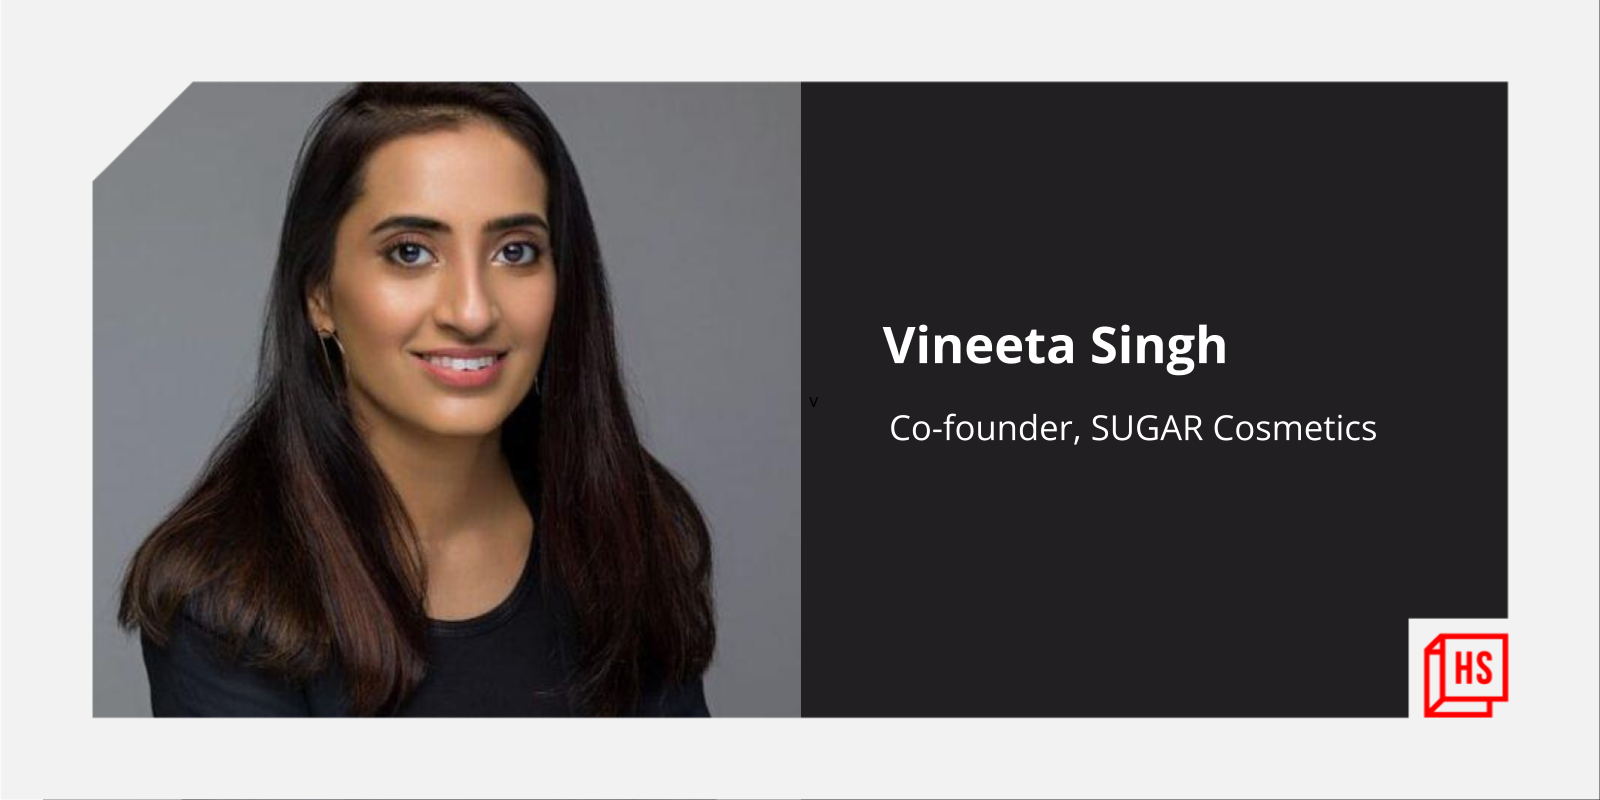 Vineeta Singh's Instagram is a goldmine for lessons in